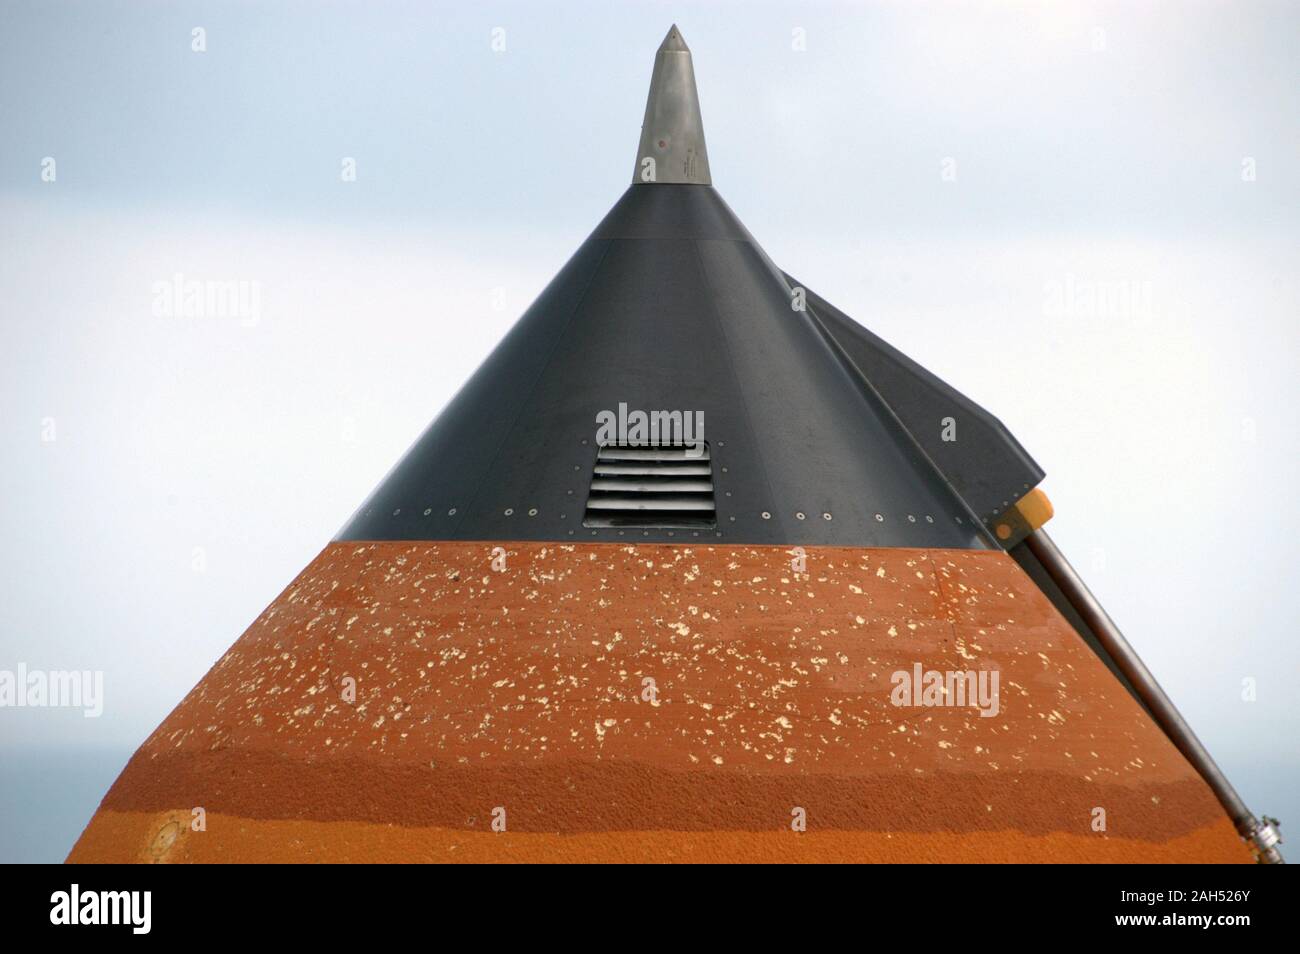 At Launch Pad 39A, the external tank attached to Space Shuttle Atlantis shows damage from hail bombardment during a strong thunderstorm that passed through Kennedy Space Center about 5 p.m. EST on Feb. 26. Stock Photo